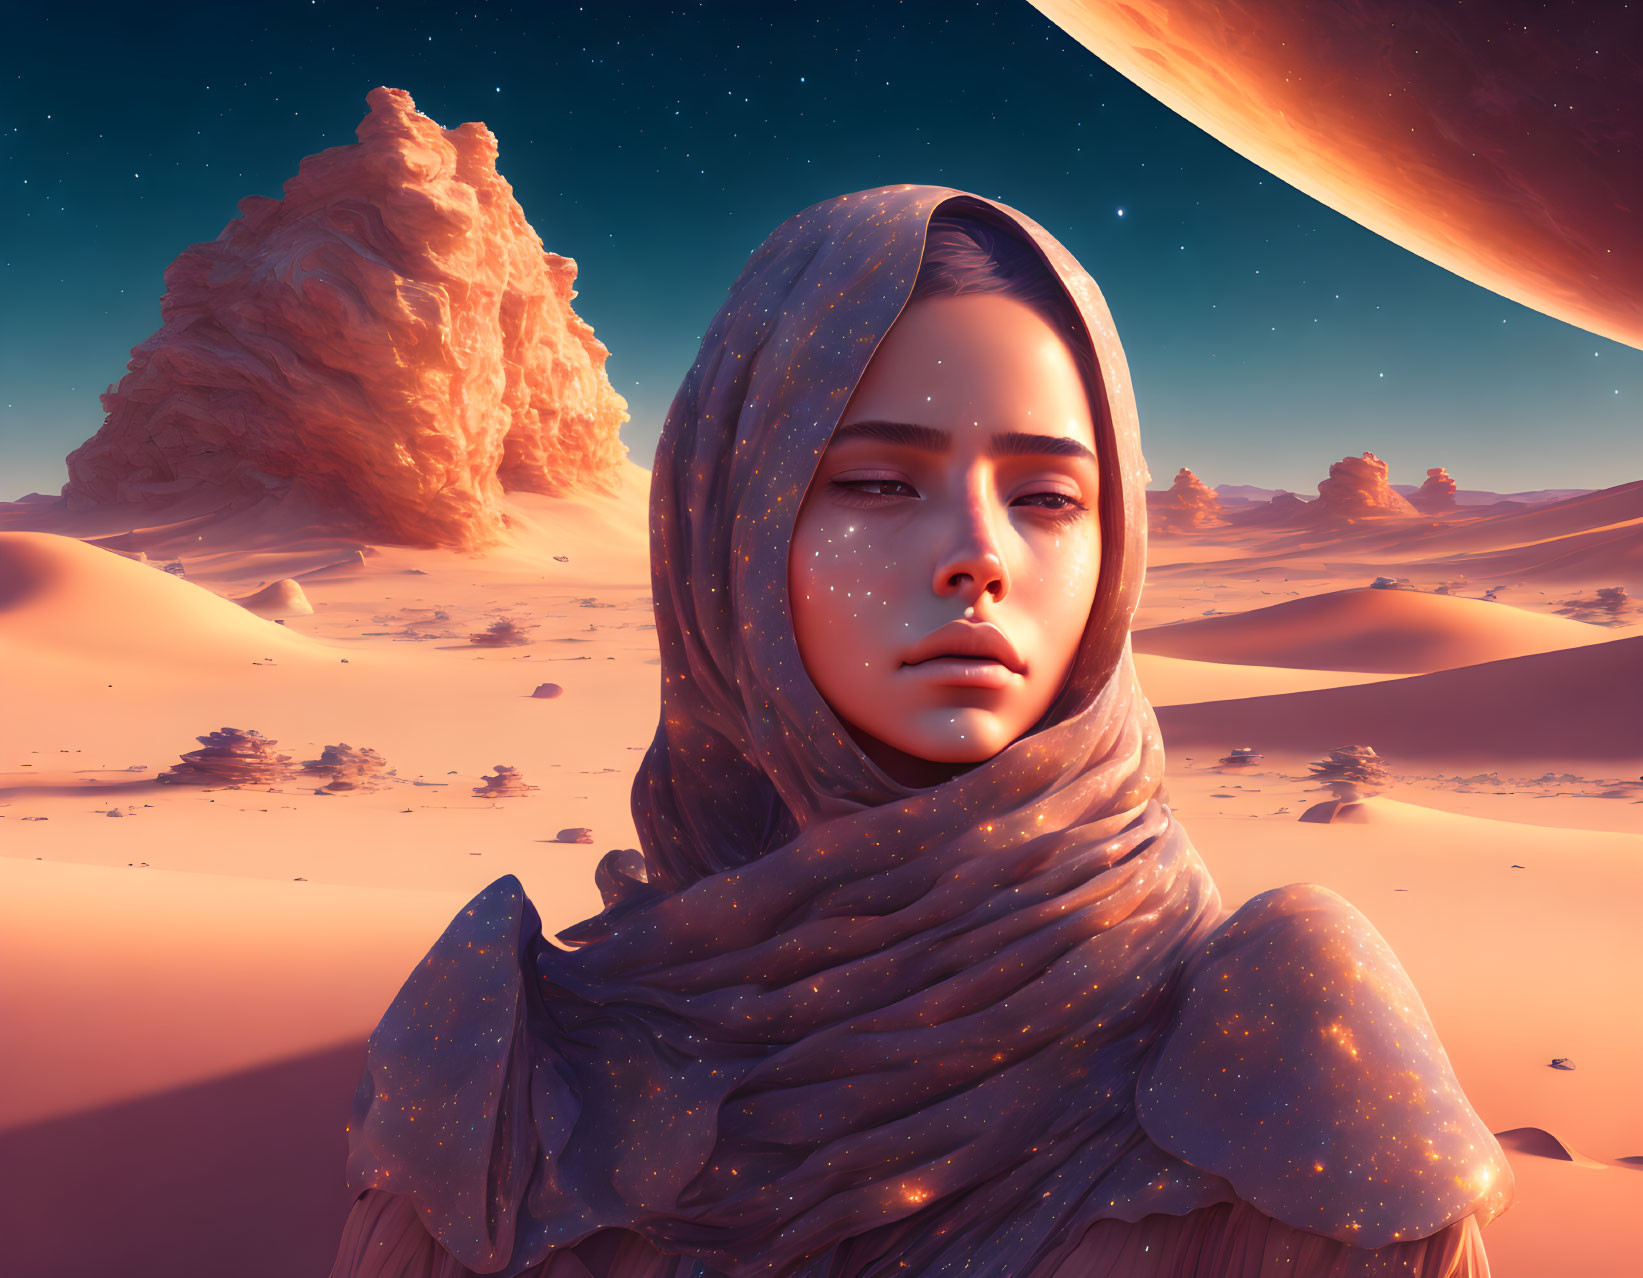 Contemplative woman with starry shawl in desert landscape with large planet.